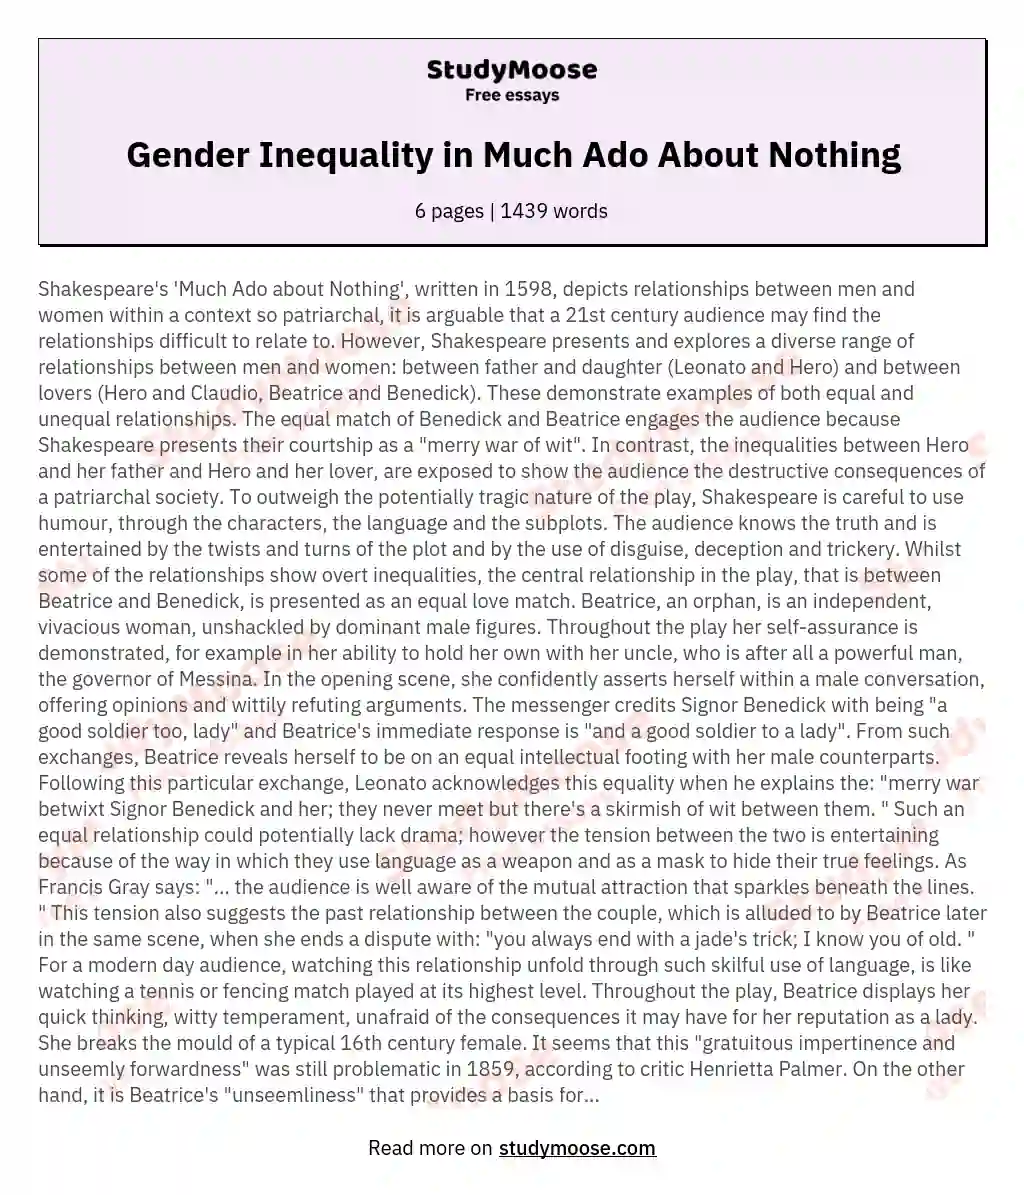 Gender Inequality in Much Ado About Nothing essay